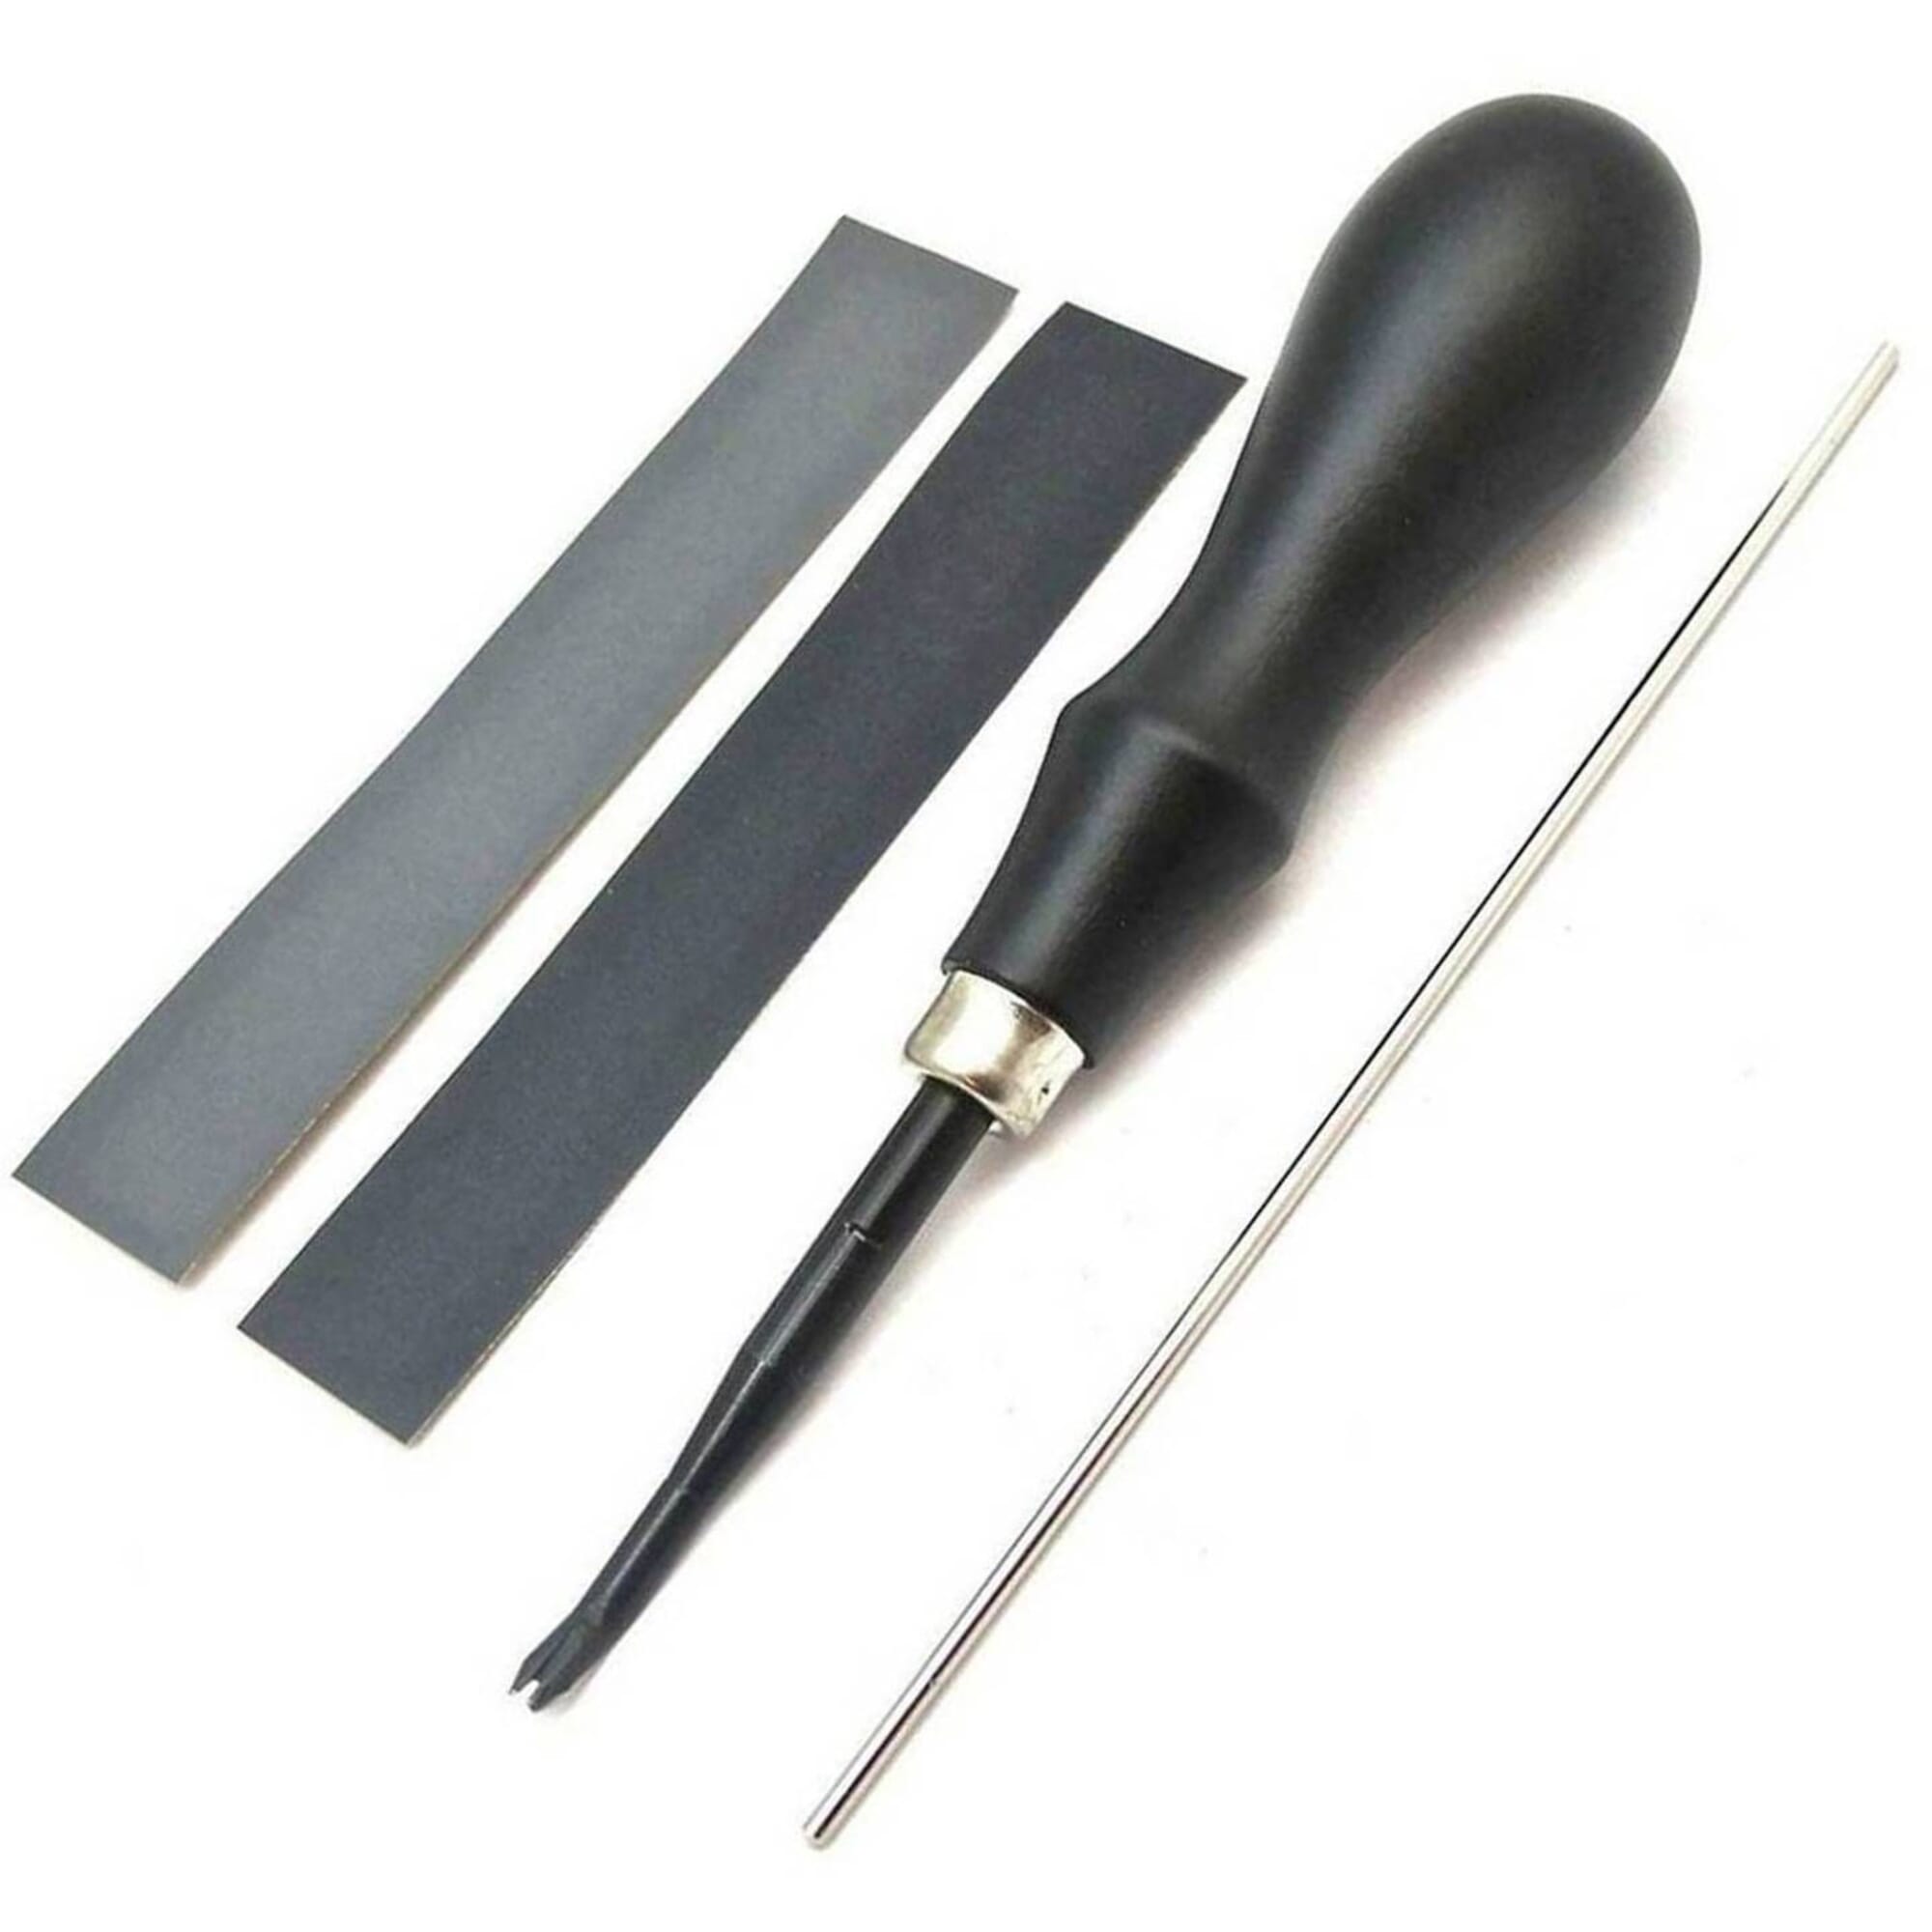 Craft Sha Leathercraft Punching Hand Tools S45C Steel 0.6-30mm Precision Leather Hole Cutting Round Hollow Punch, for Leatherworking